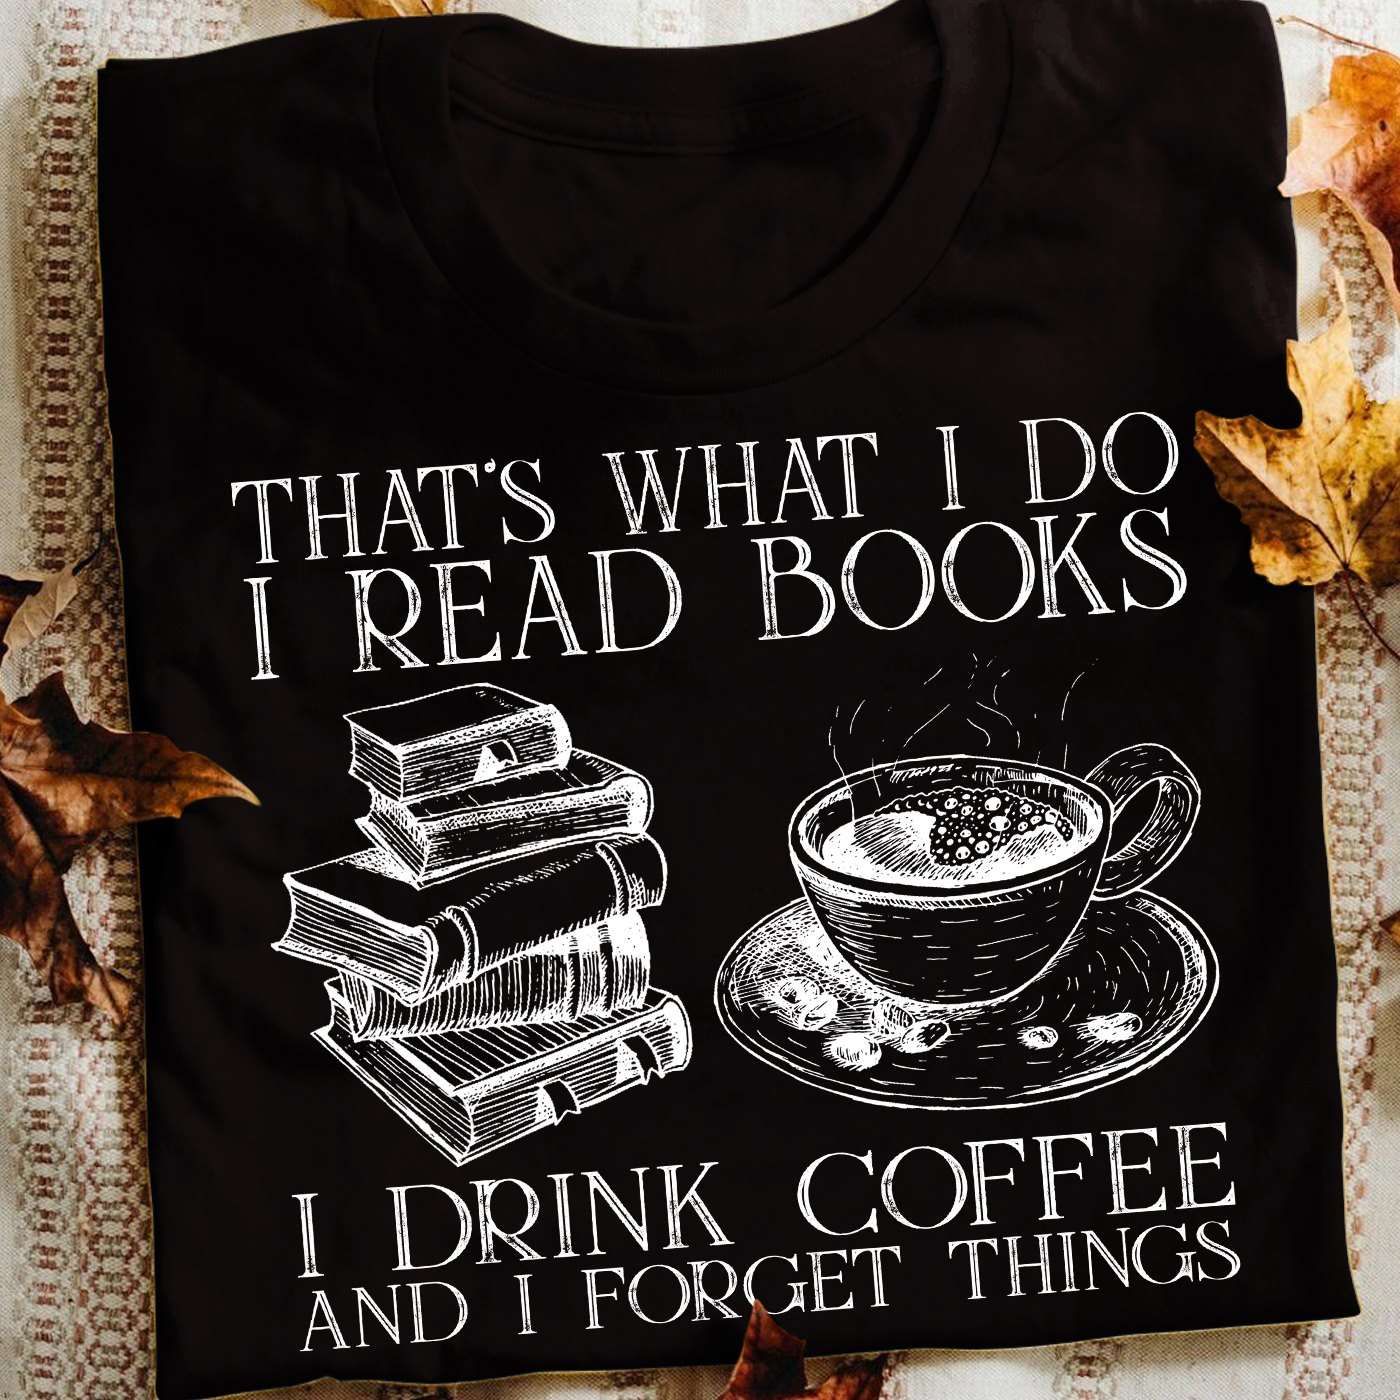 That's what I do I read books I drink coffee and I forget things - Coffee and books